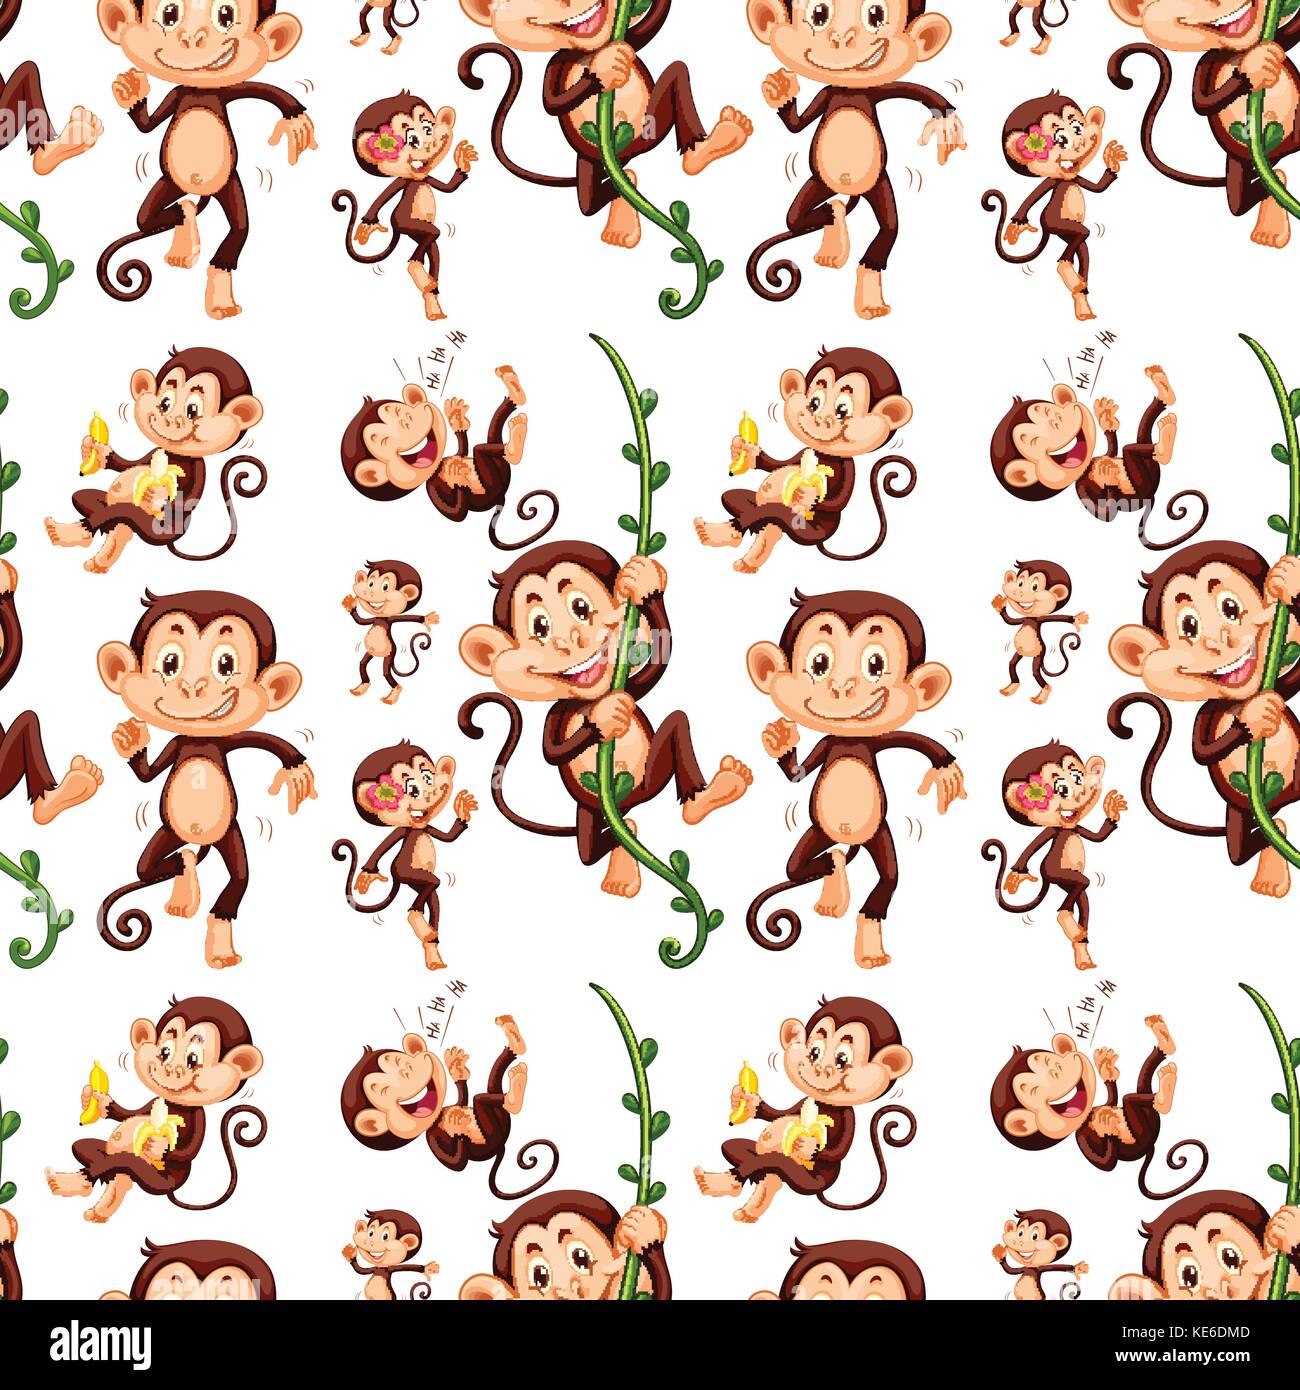 Seamless monkey in different actions illustration Stock Vector Image ...